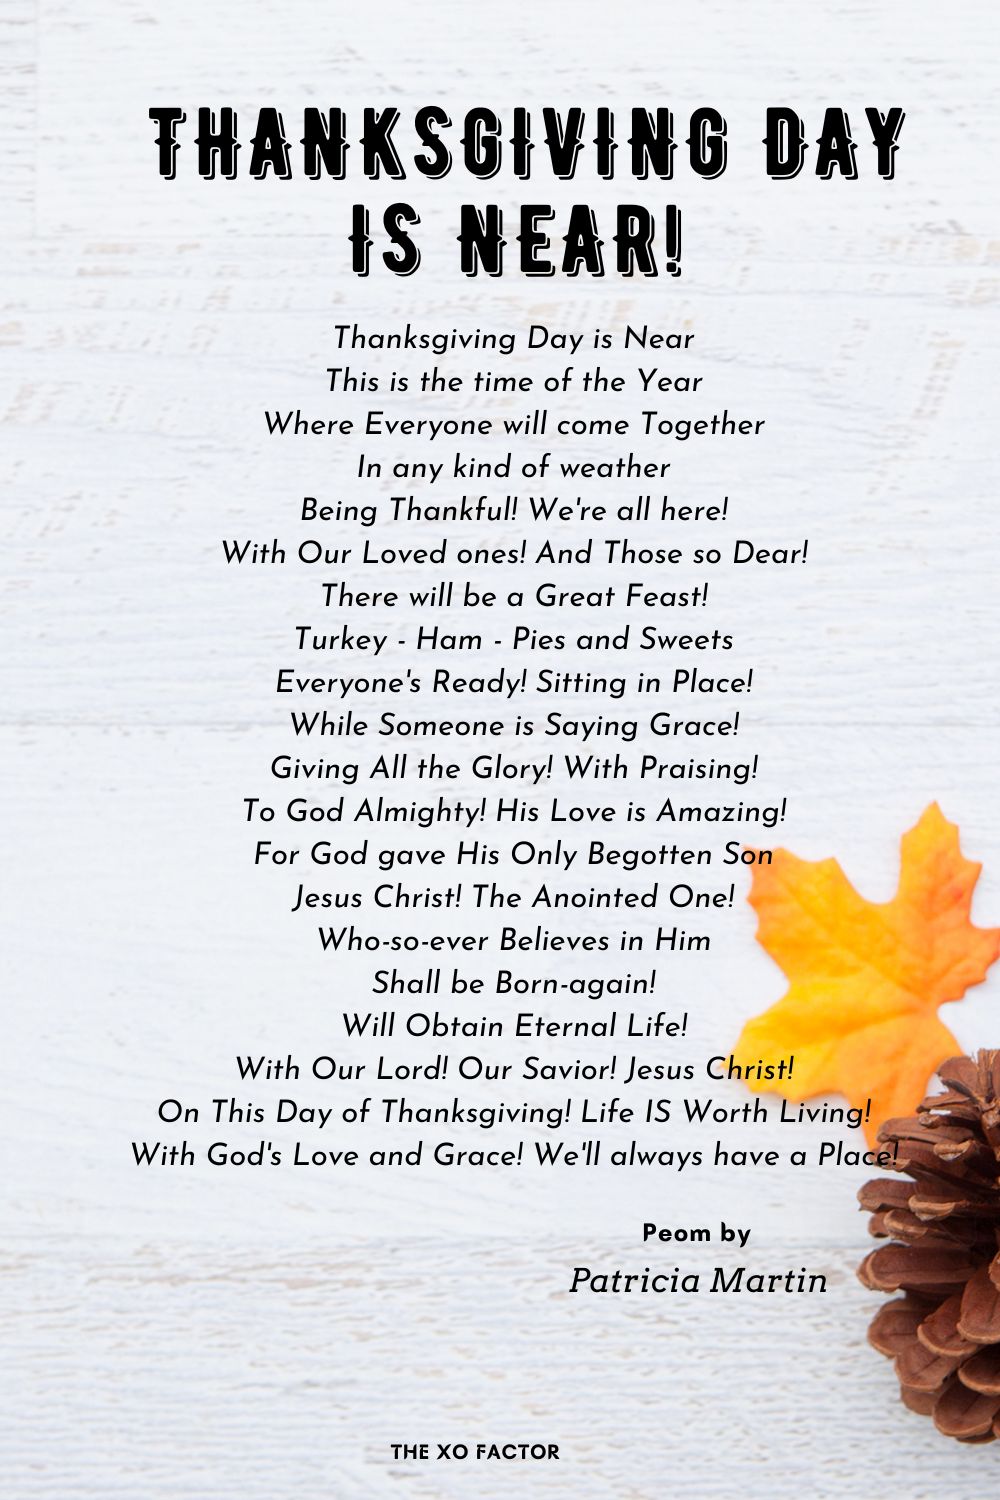 Thanksgiving Day Is Near! Poem